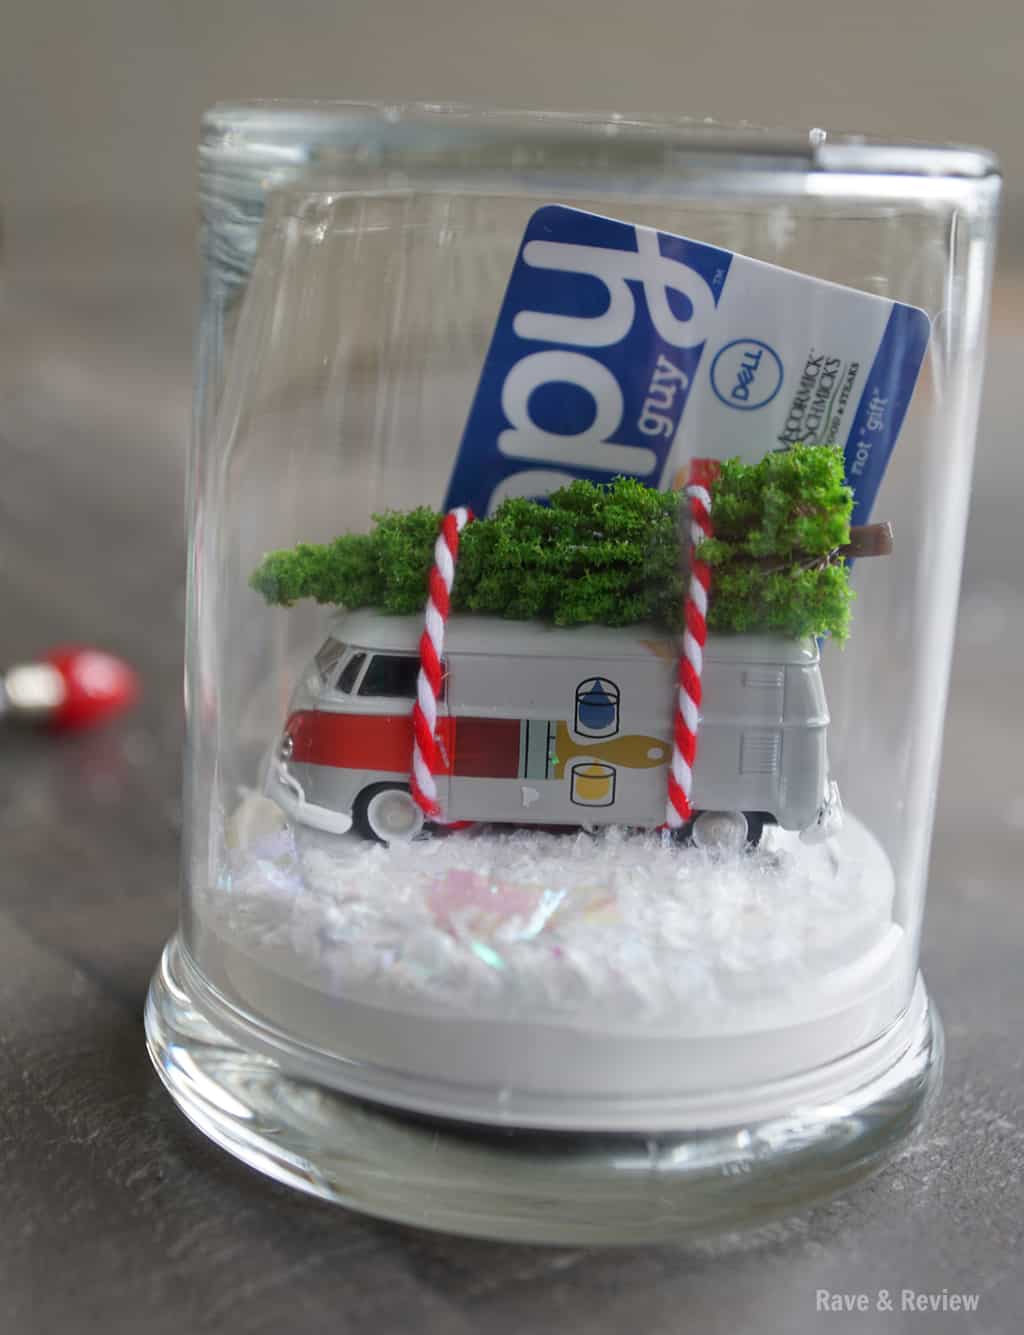 Happy Cards snowglobe with VW